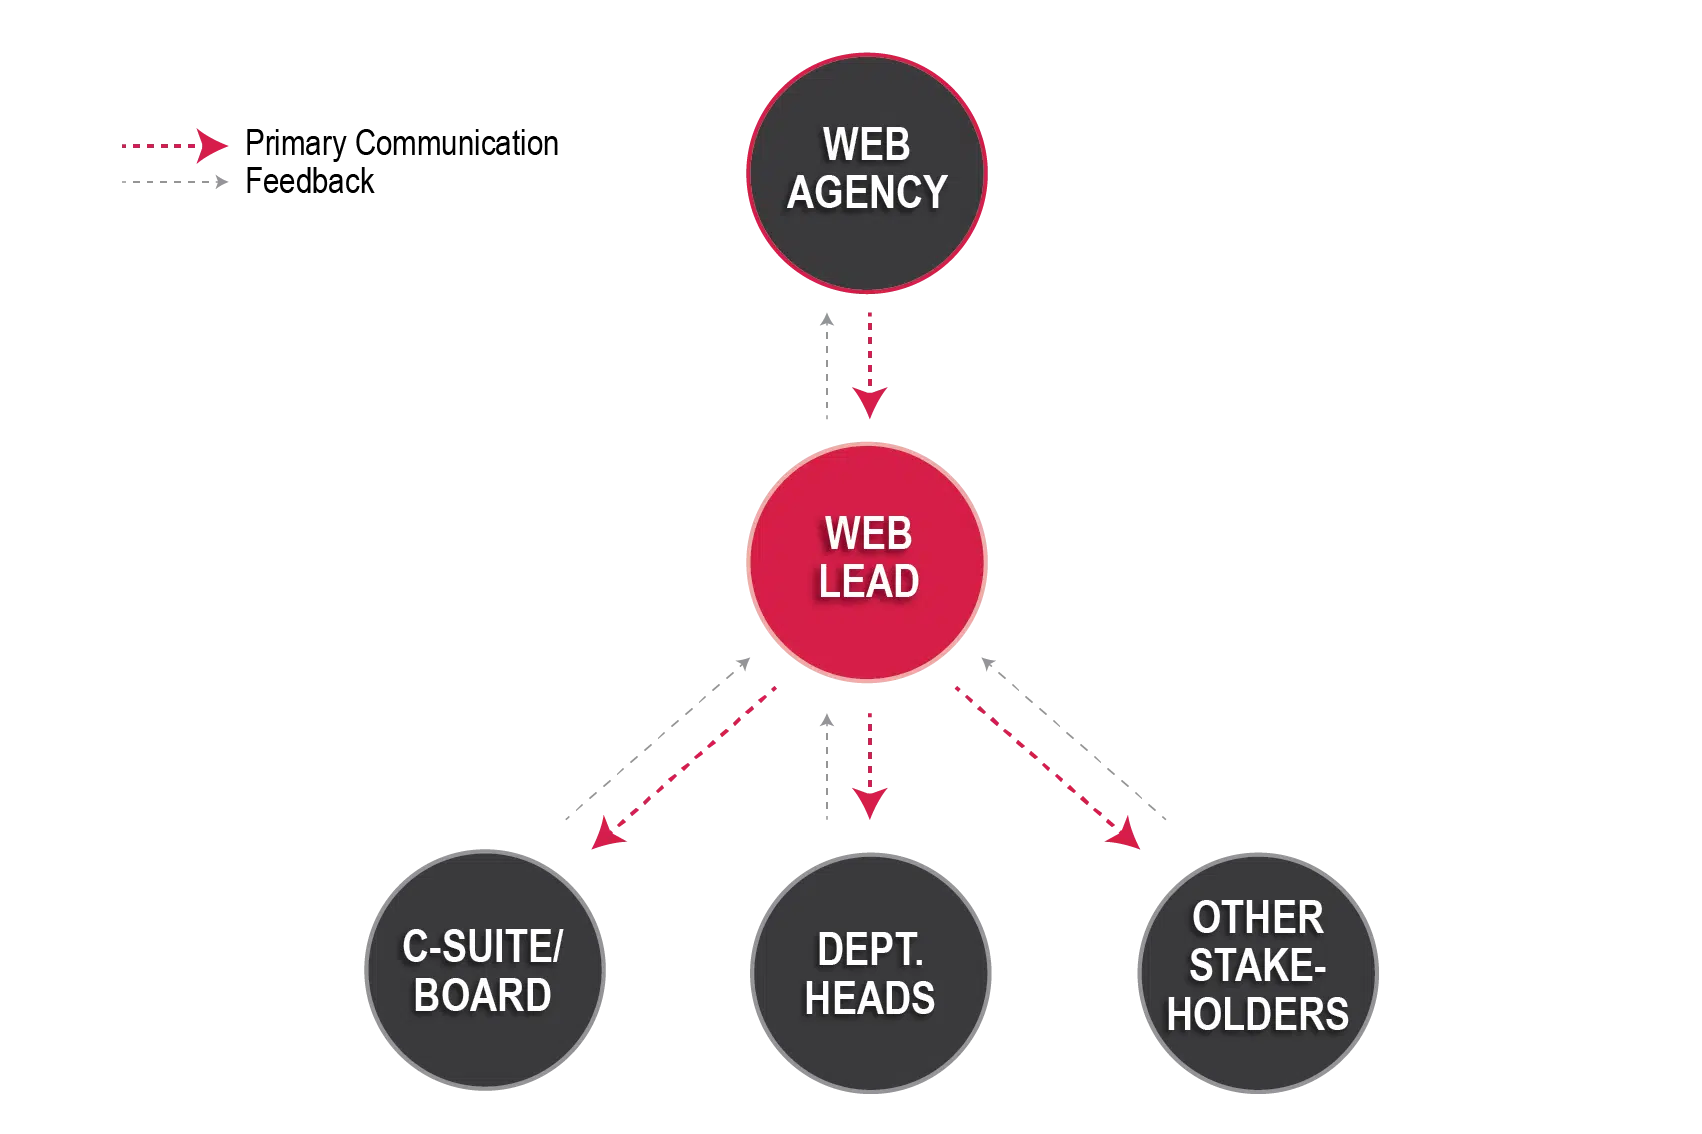 Flowchart that shows the communication line between Web Agency to Web Lead to All Stakeholders (Csuite, Board, Dept. Heads, etc.) and the a reverse line showing feeback communication following the reverse direction.